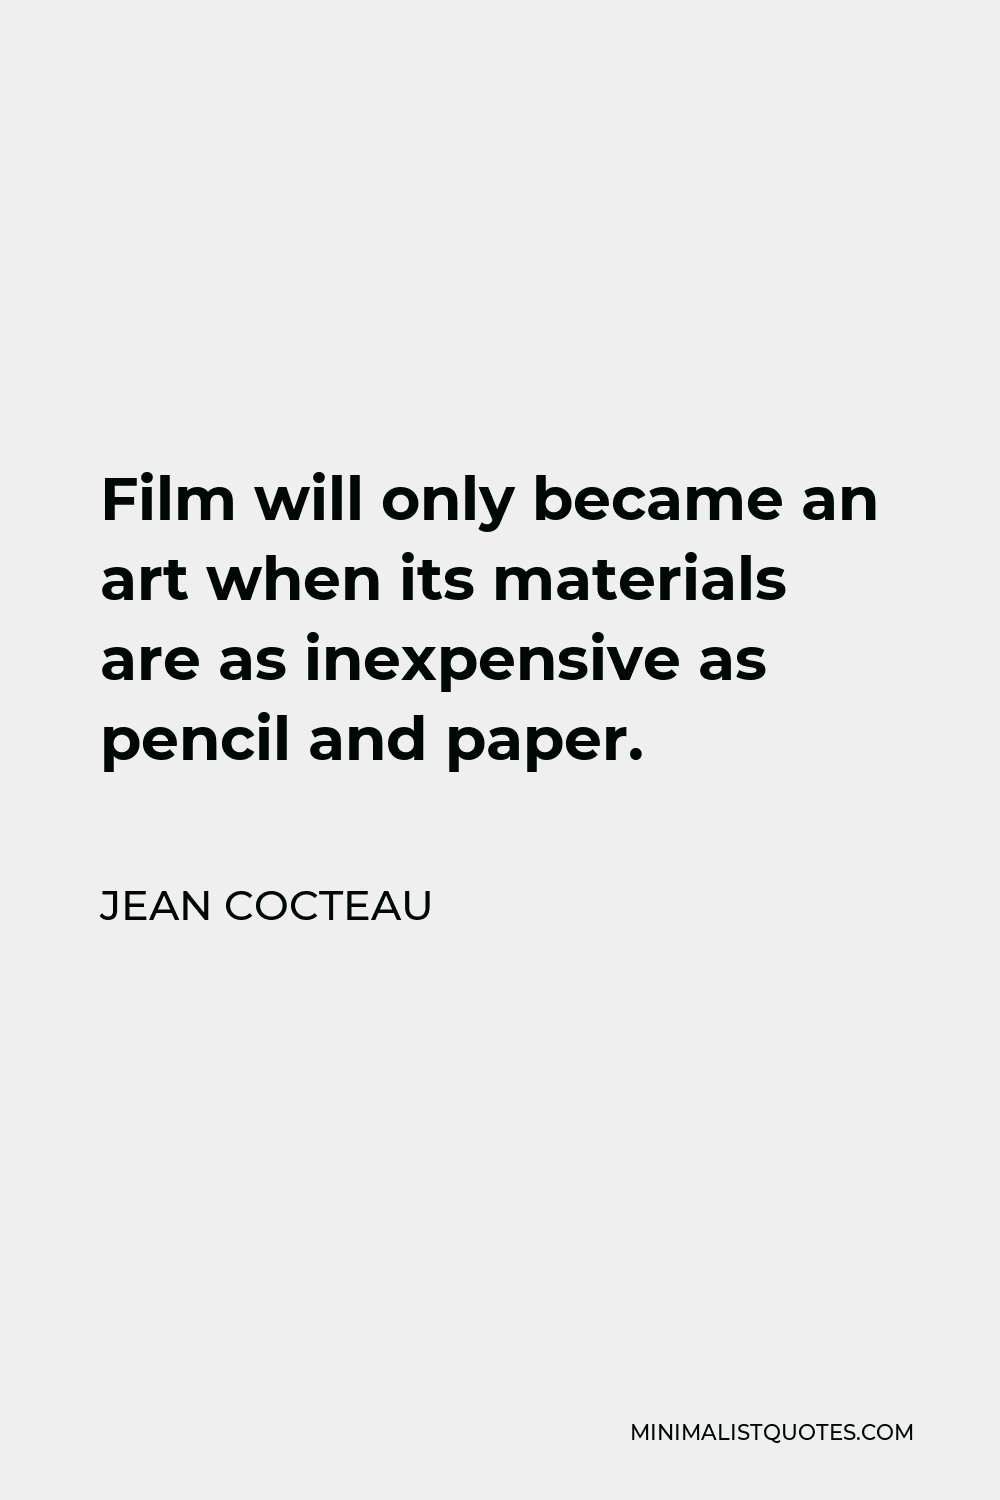 Jean Cocteau Quote - Film will only became an art when its materials are as inexpensive as pencil and paper.